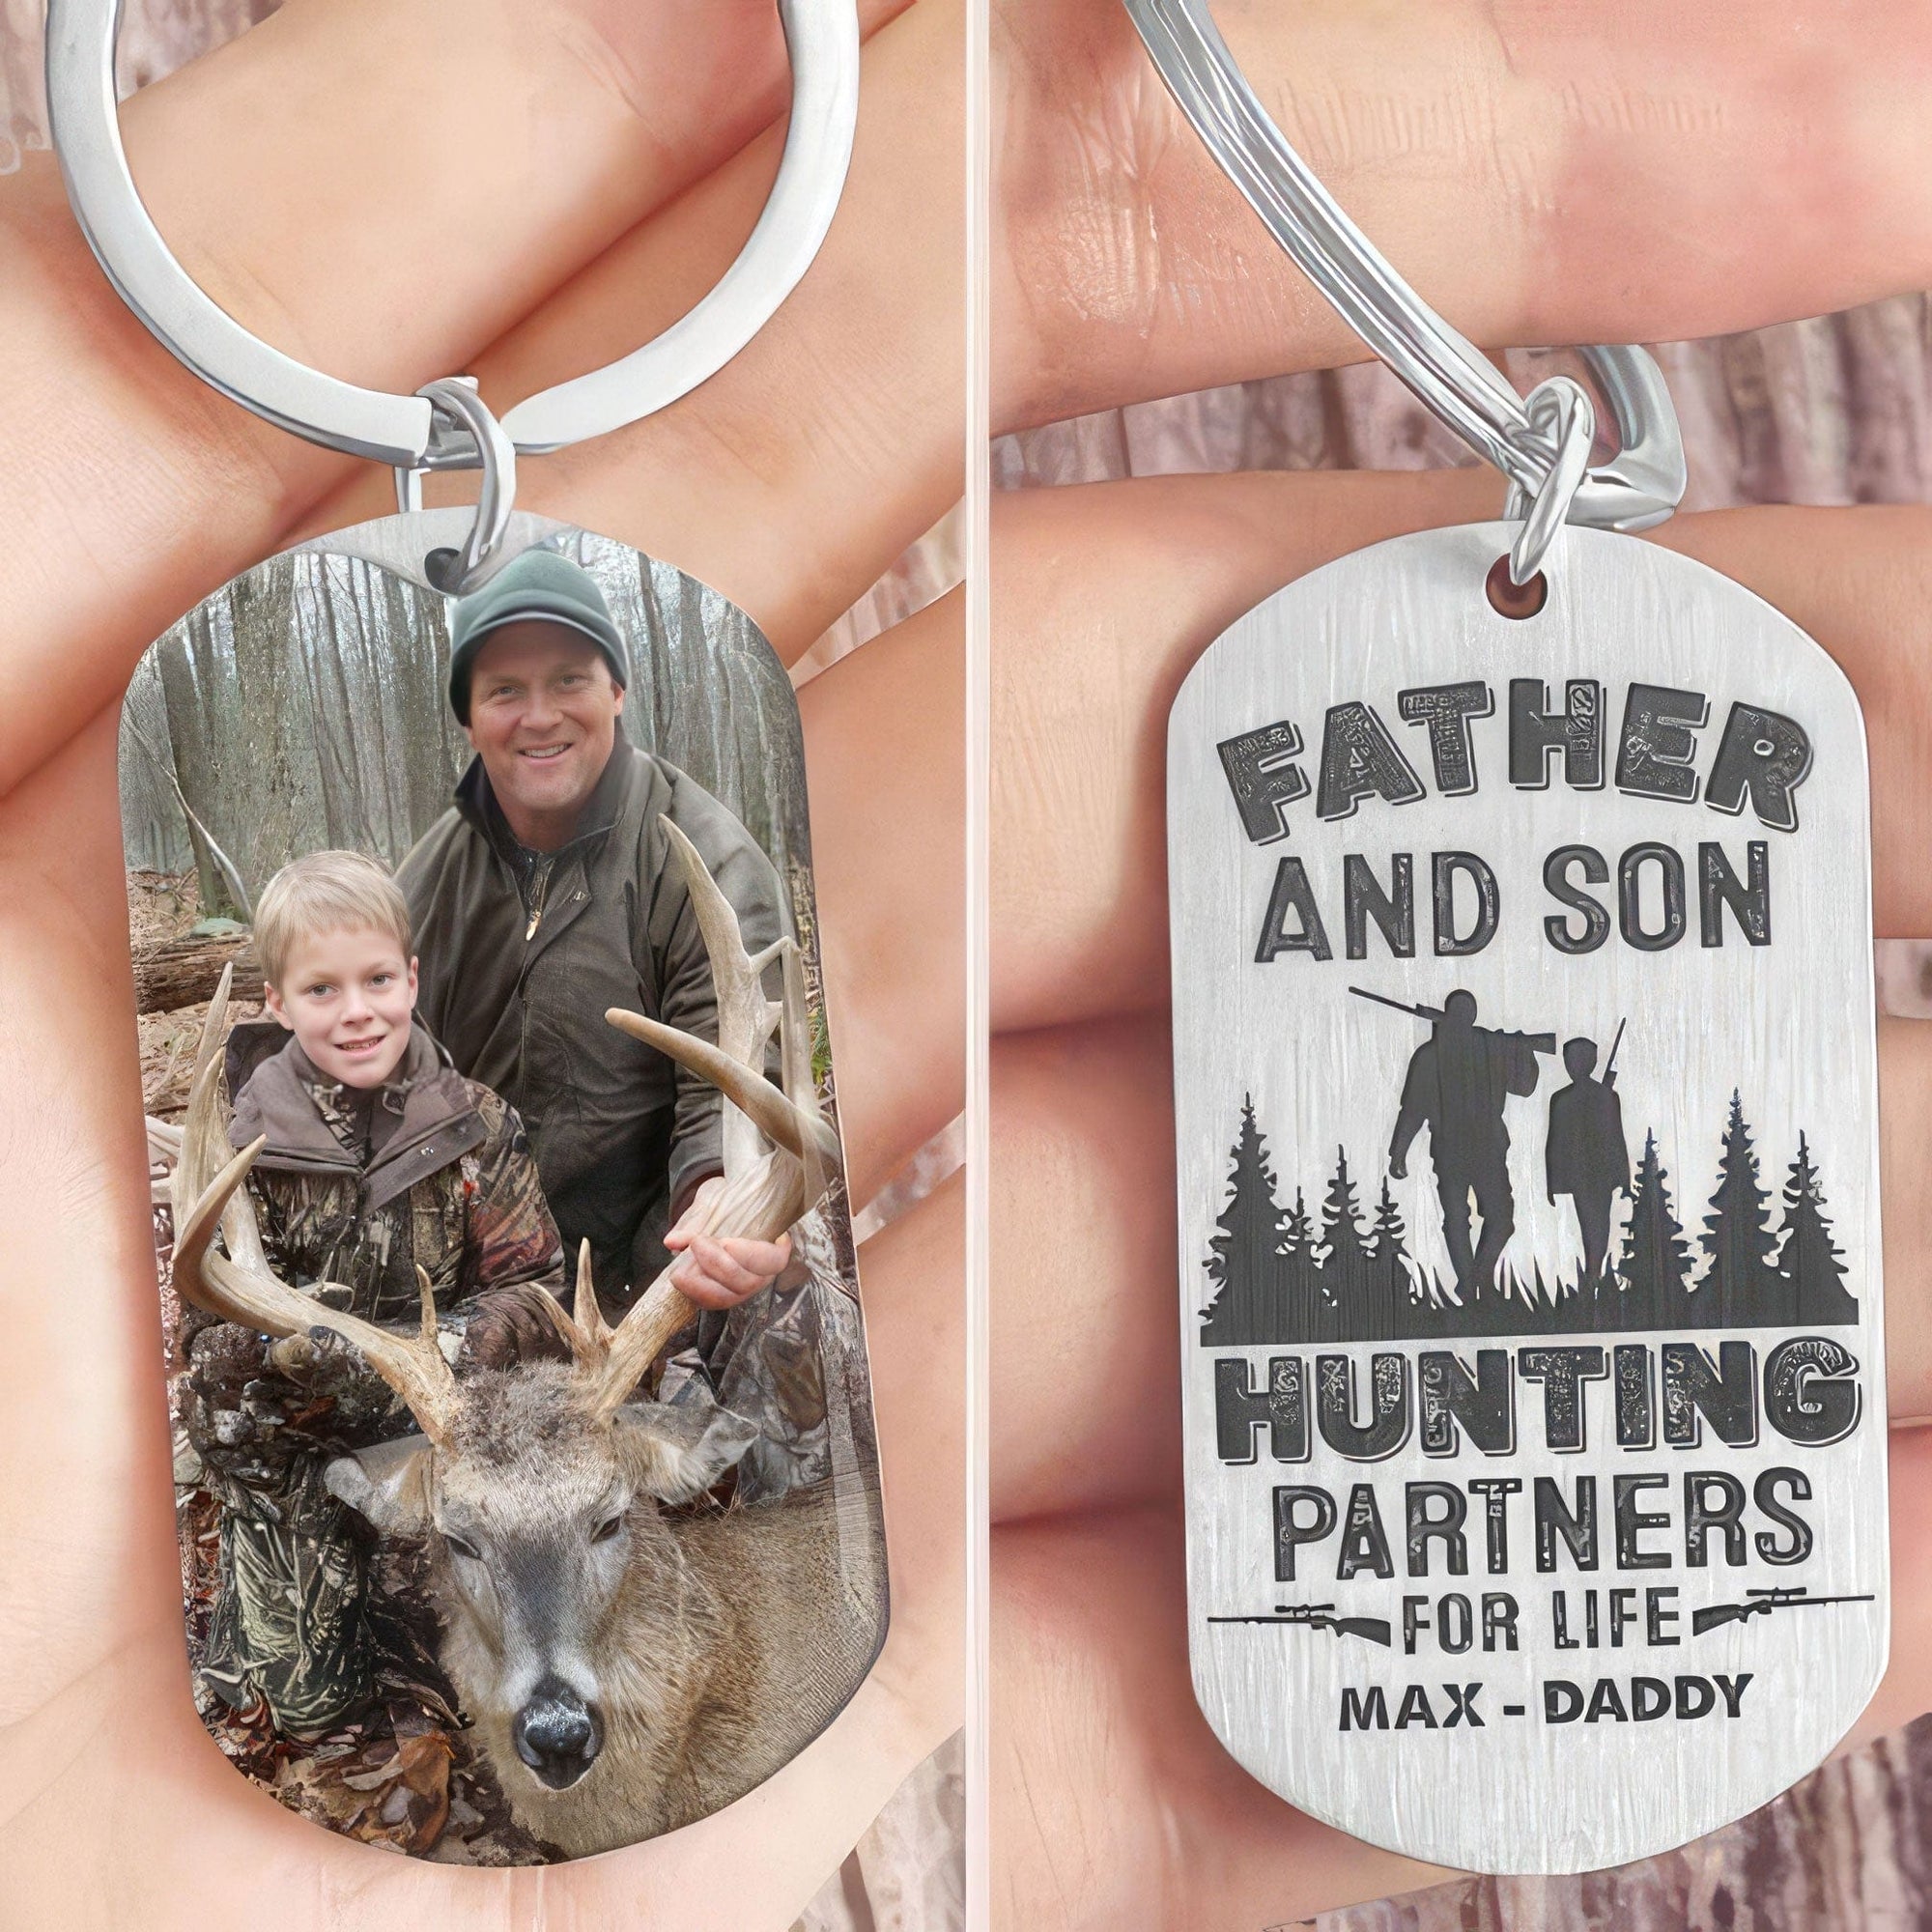 GeckoCustom Father And Son Hunting Partners For Life Hunter Metal Keychain HN590 With Gift Box (Favorite)